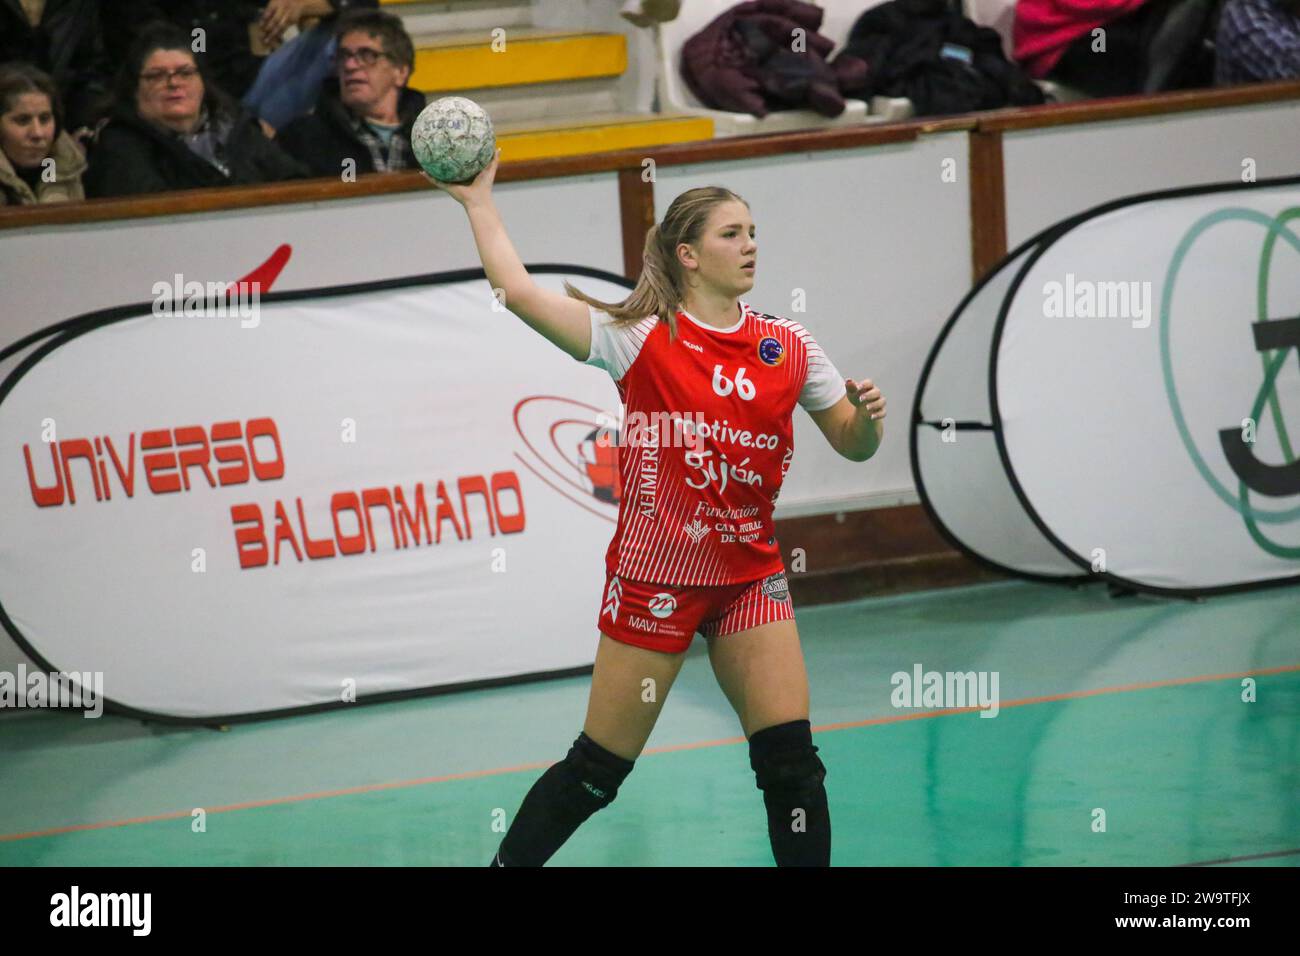 Gijon, Spain. 29th Dec, 2023. The player of Motive.co Gijon Balonmano La Calzada, Dorottya Margit Zentai (66) with the ball during the 13th matchday of the Liga Guerreras Iberdrola 2023-24 between Motive.co Gijon Balonmano La Calzada and the Mecalia Atletico Guardes, on December 29, 2023, at the La Arena Pavilion, in Gijon, Spain. (Photo by Alberto Brevers/Pacific Press) Credit: Pacific Press Media Production Corp./Alamy Live News Stock Photo